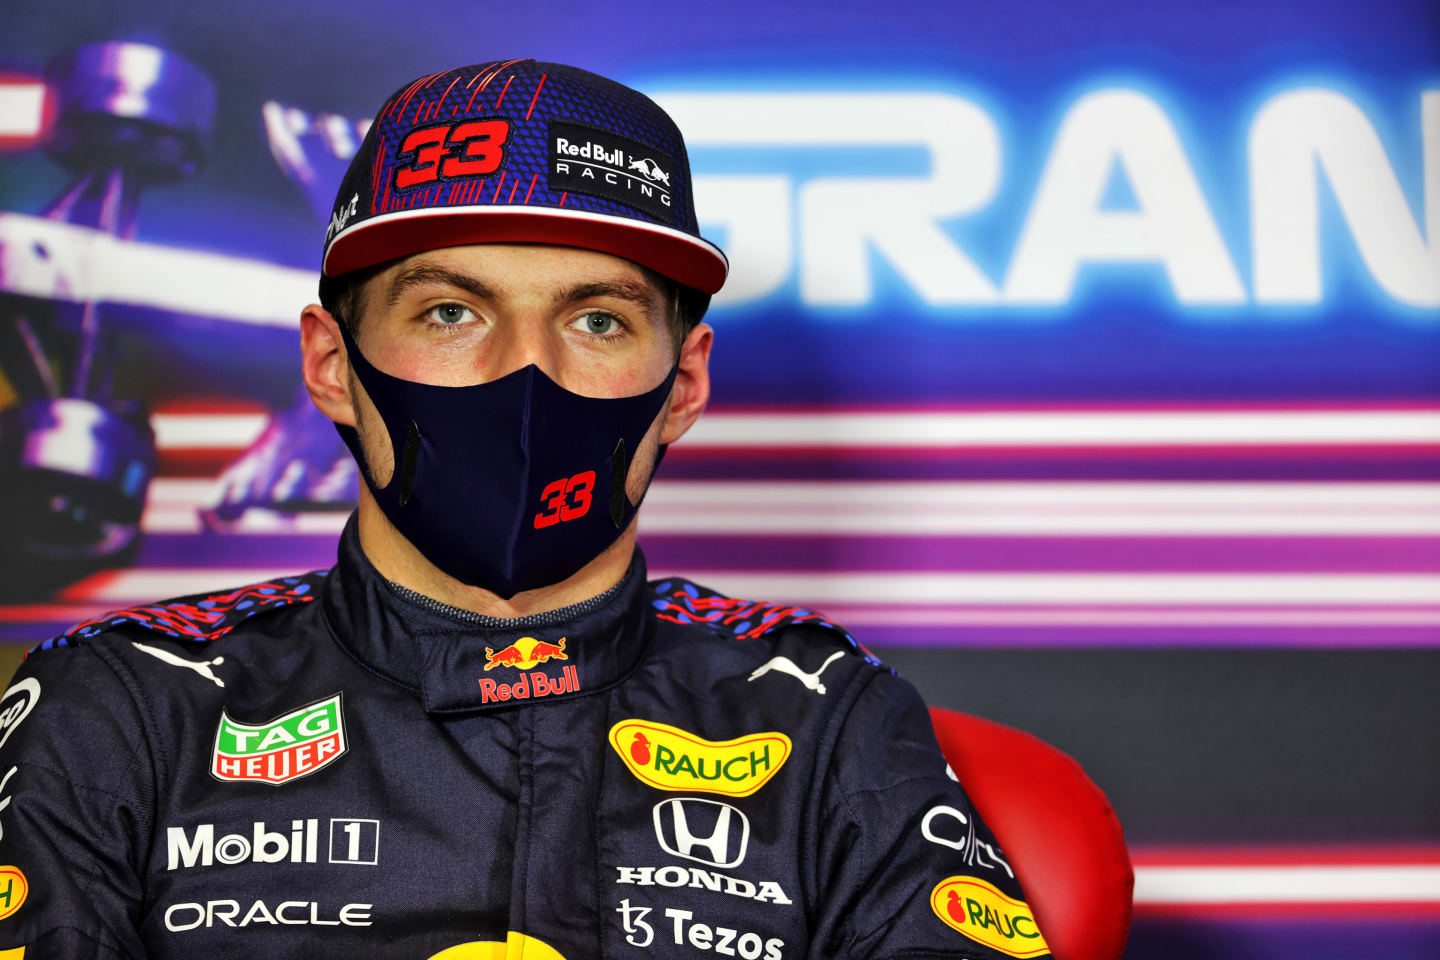 SAO PAULO, BRAZIL - NOVEMBER 13: Second placed Max Verstappen of Netherlands and Red Bull Racing talks in the press conference after the sprint ahead of the F1 Grand Prix of Brazil at Autodromo Jose Carlos Pace on November 13, 2021 in Sao Paulo, Brazil. (Photo by XPB - Pool/Getty Images)